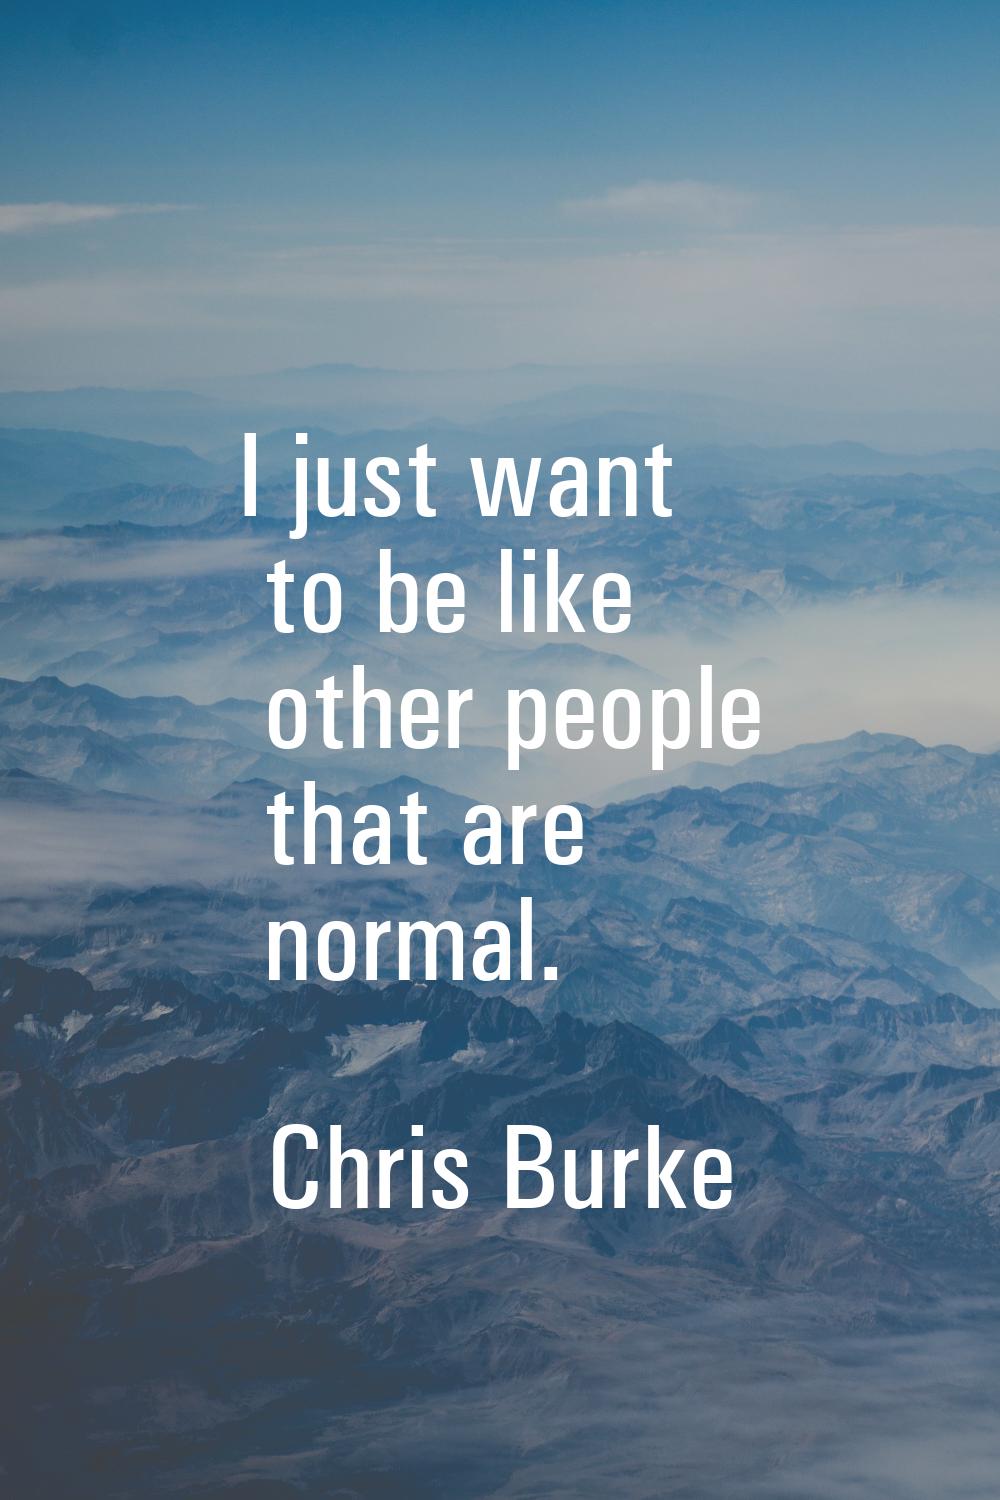 I just want to be like other people that are normal.